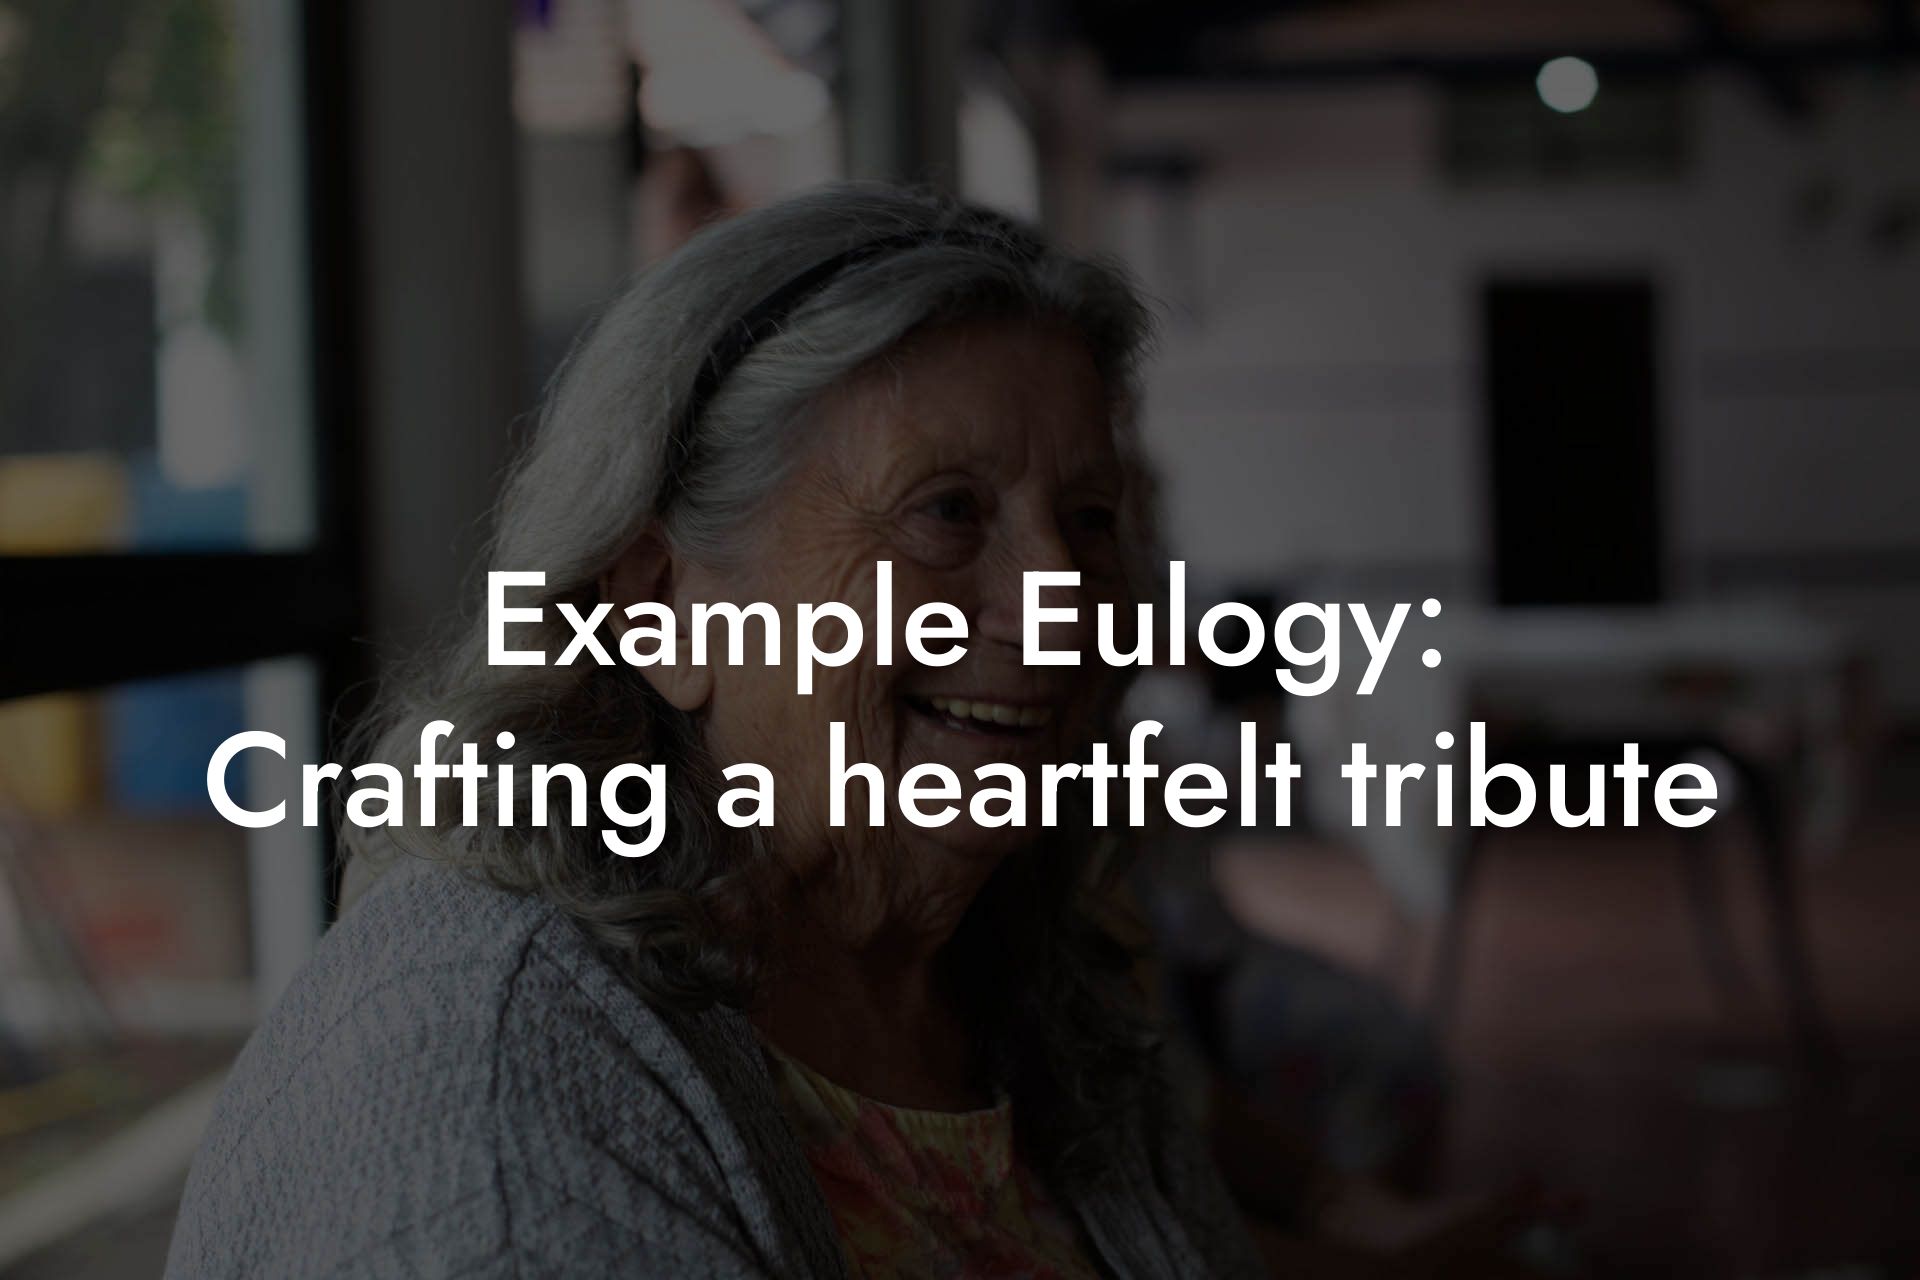 Example Eulogy: Crafting a heartfelt tribute